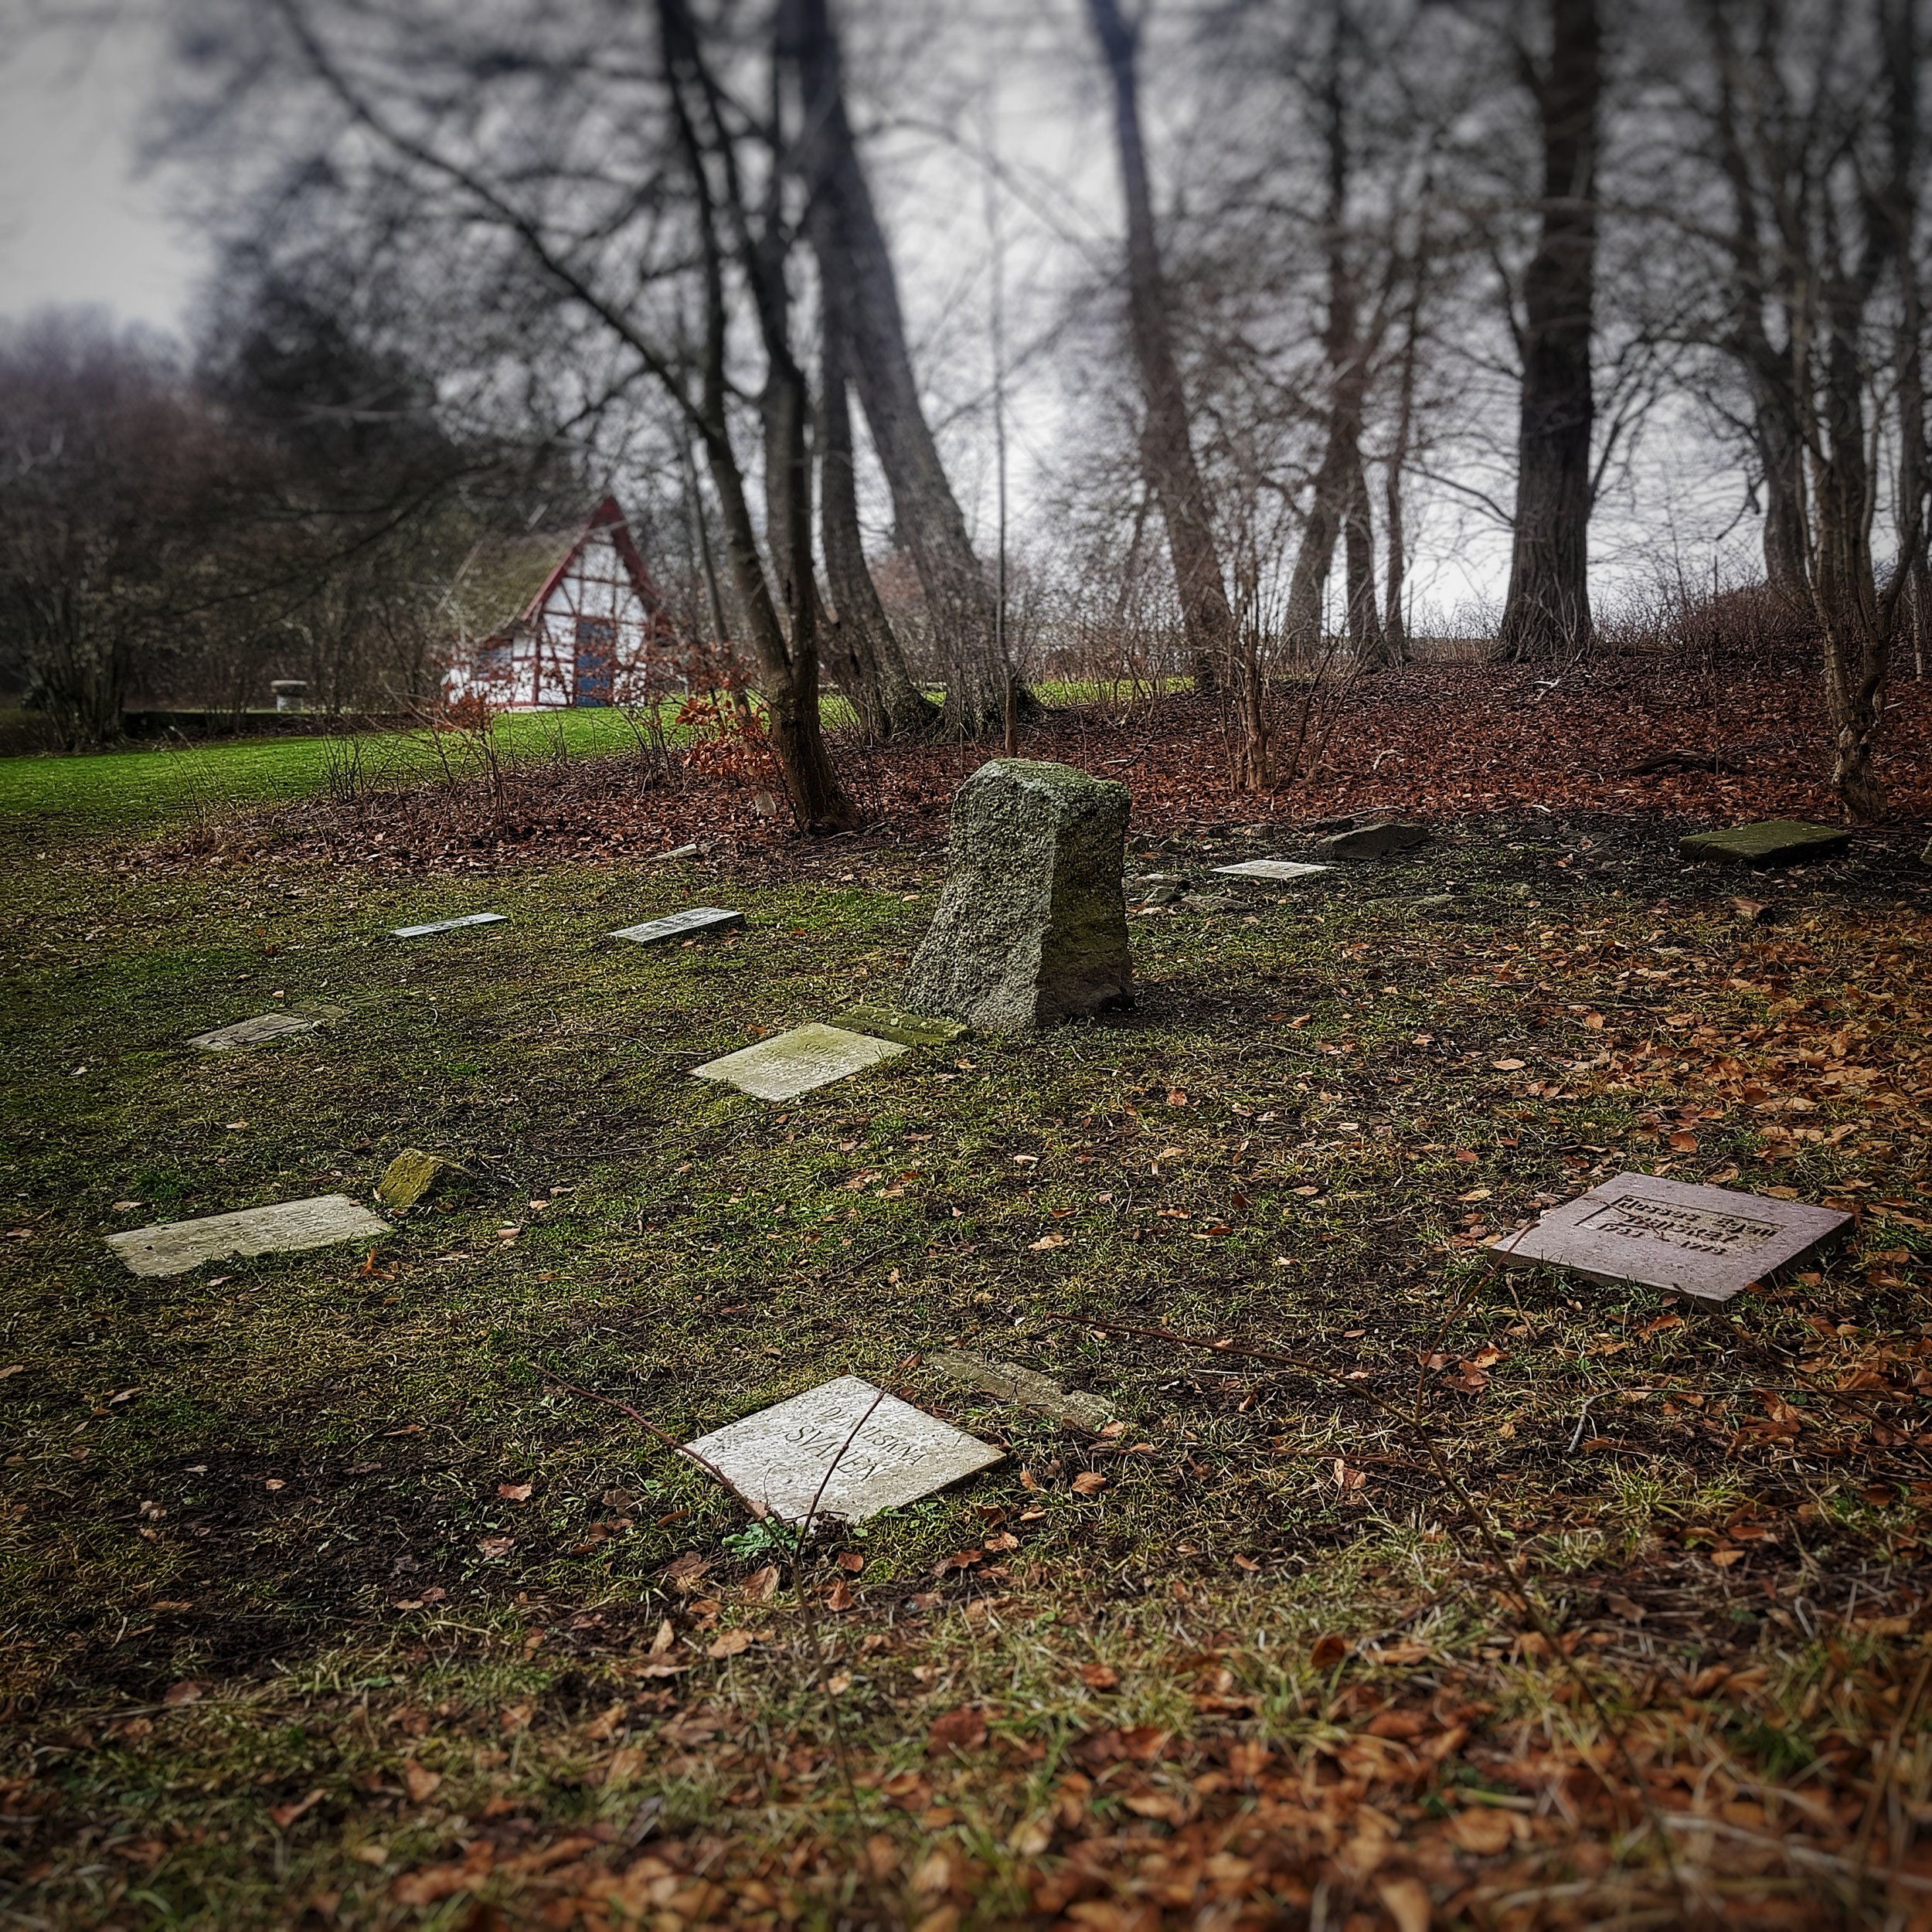 Day 30 - January 30: Pet Cemetery